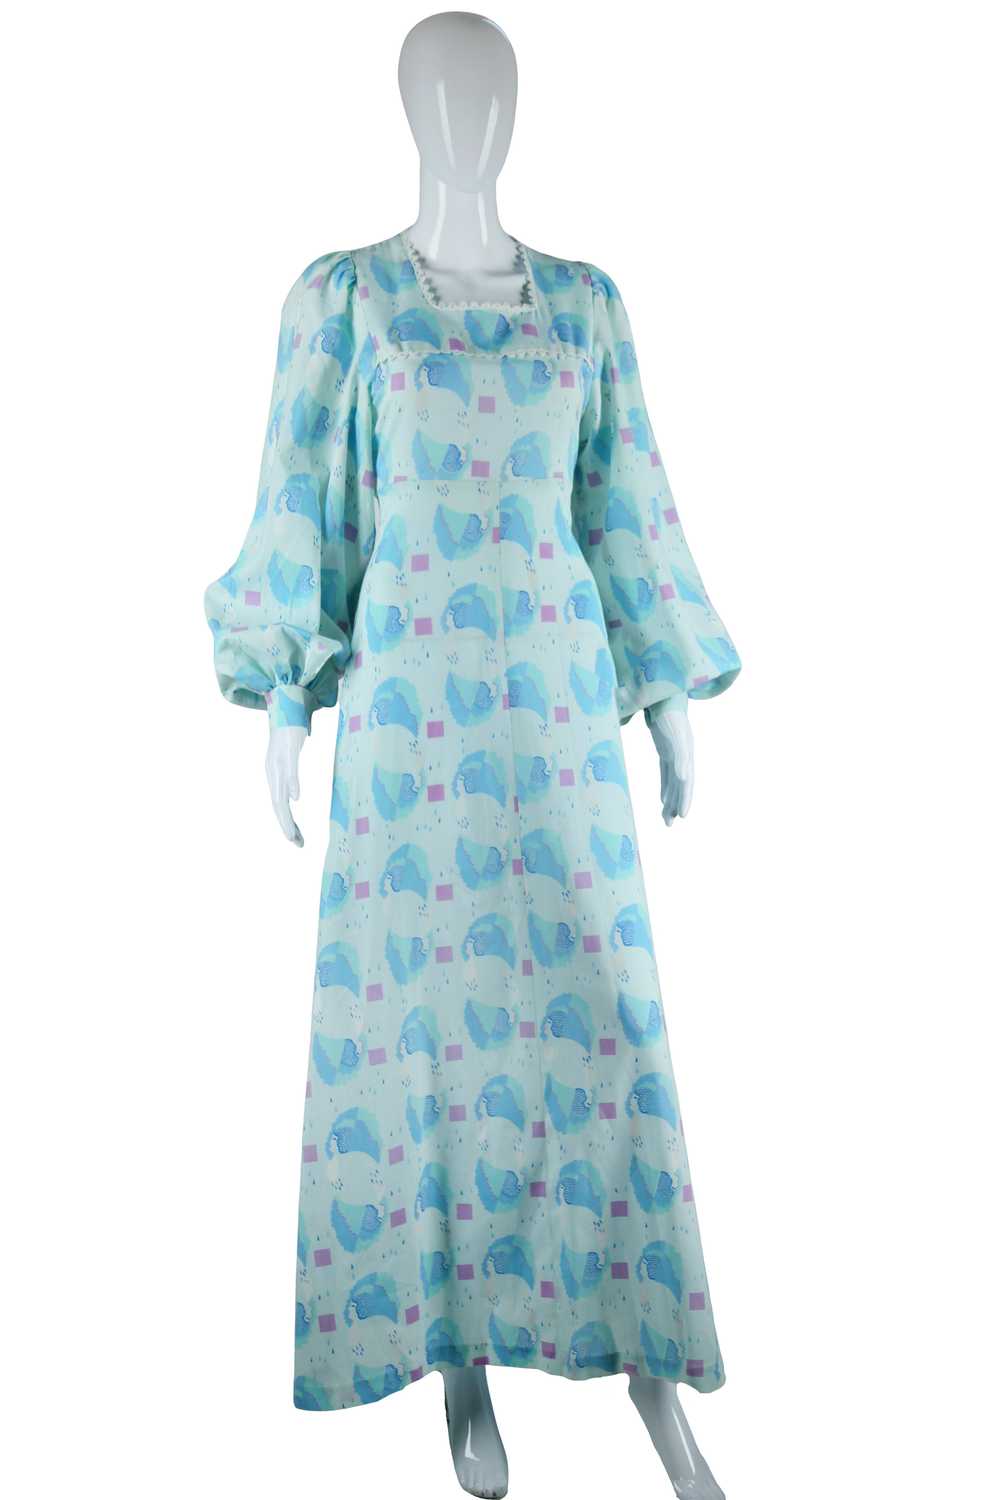 Raindrops and Faces in Profile Novelty Print Maxi… - image 3